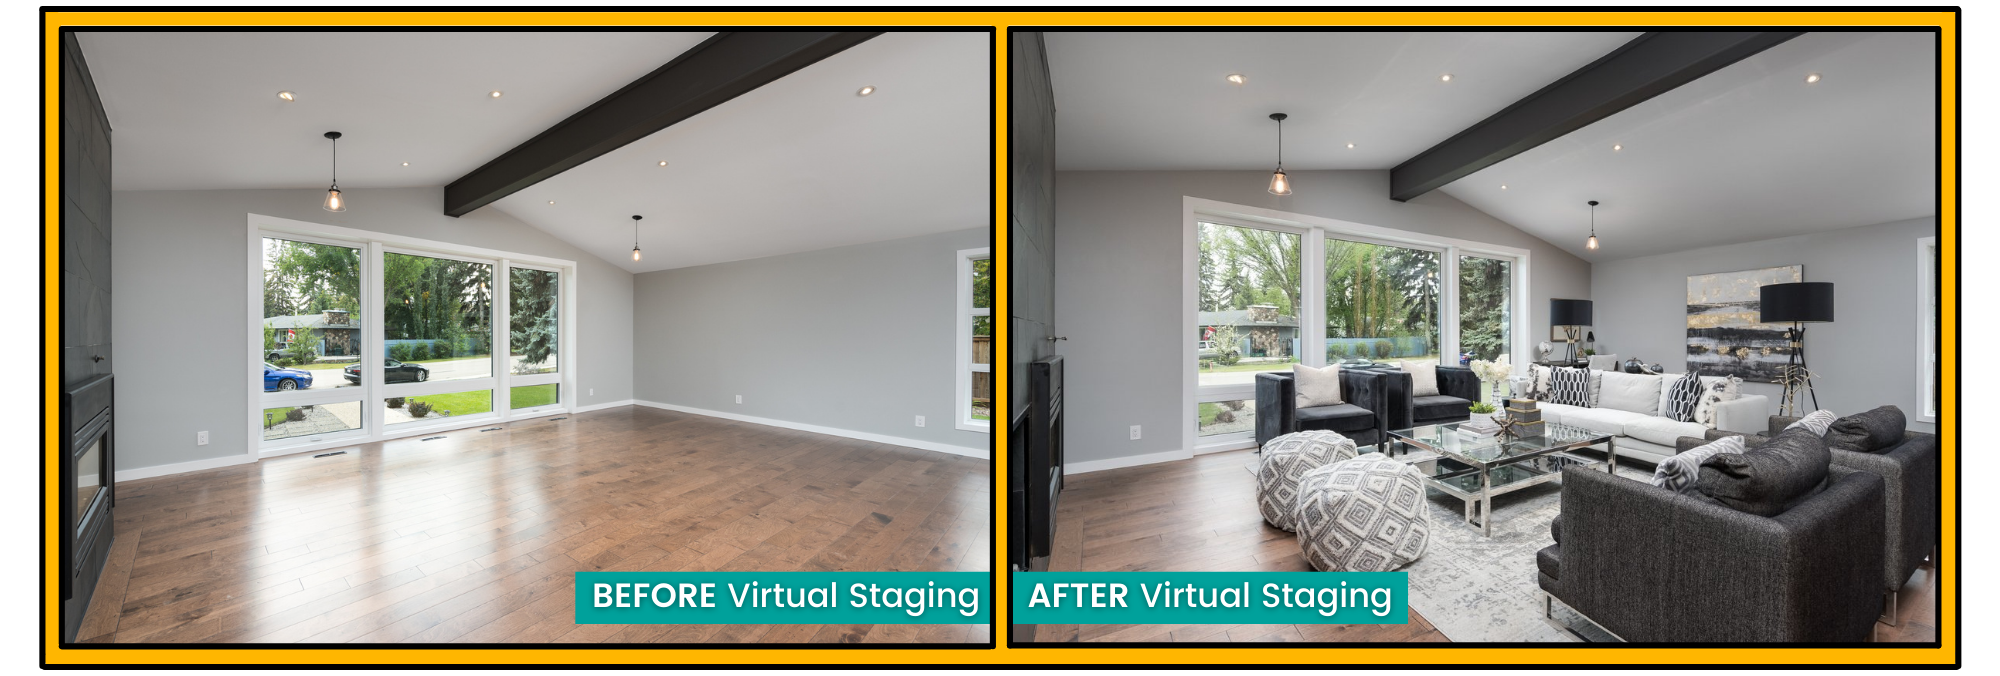 Before and after of virtual staging in a home for sale